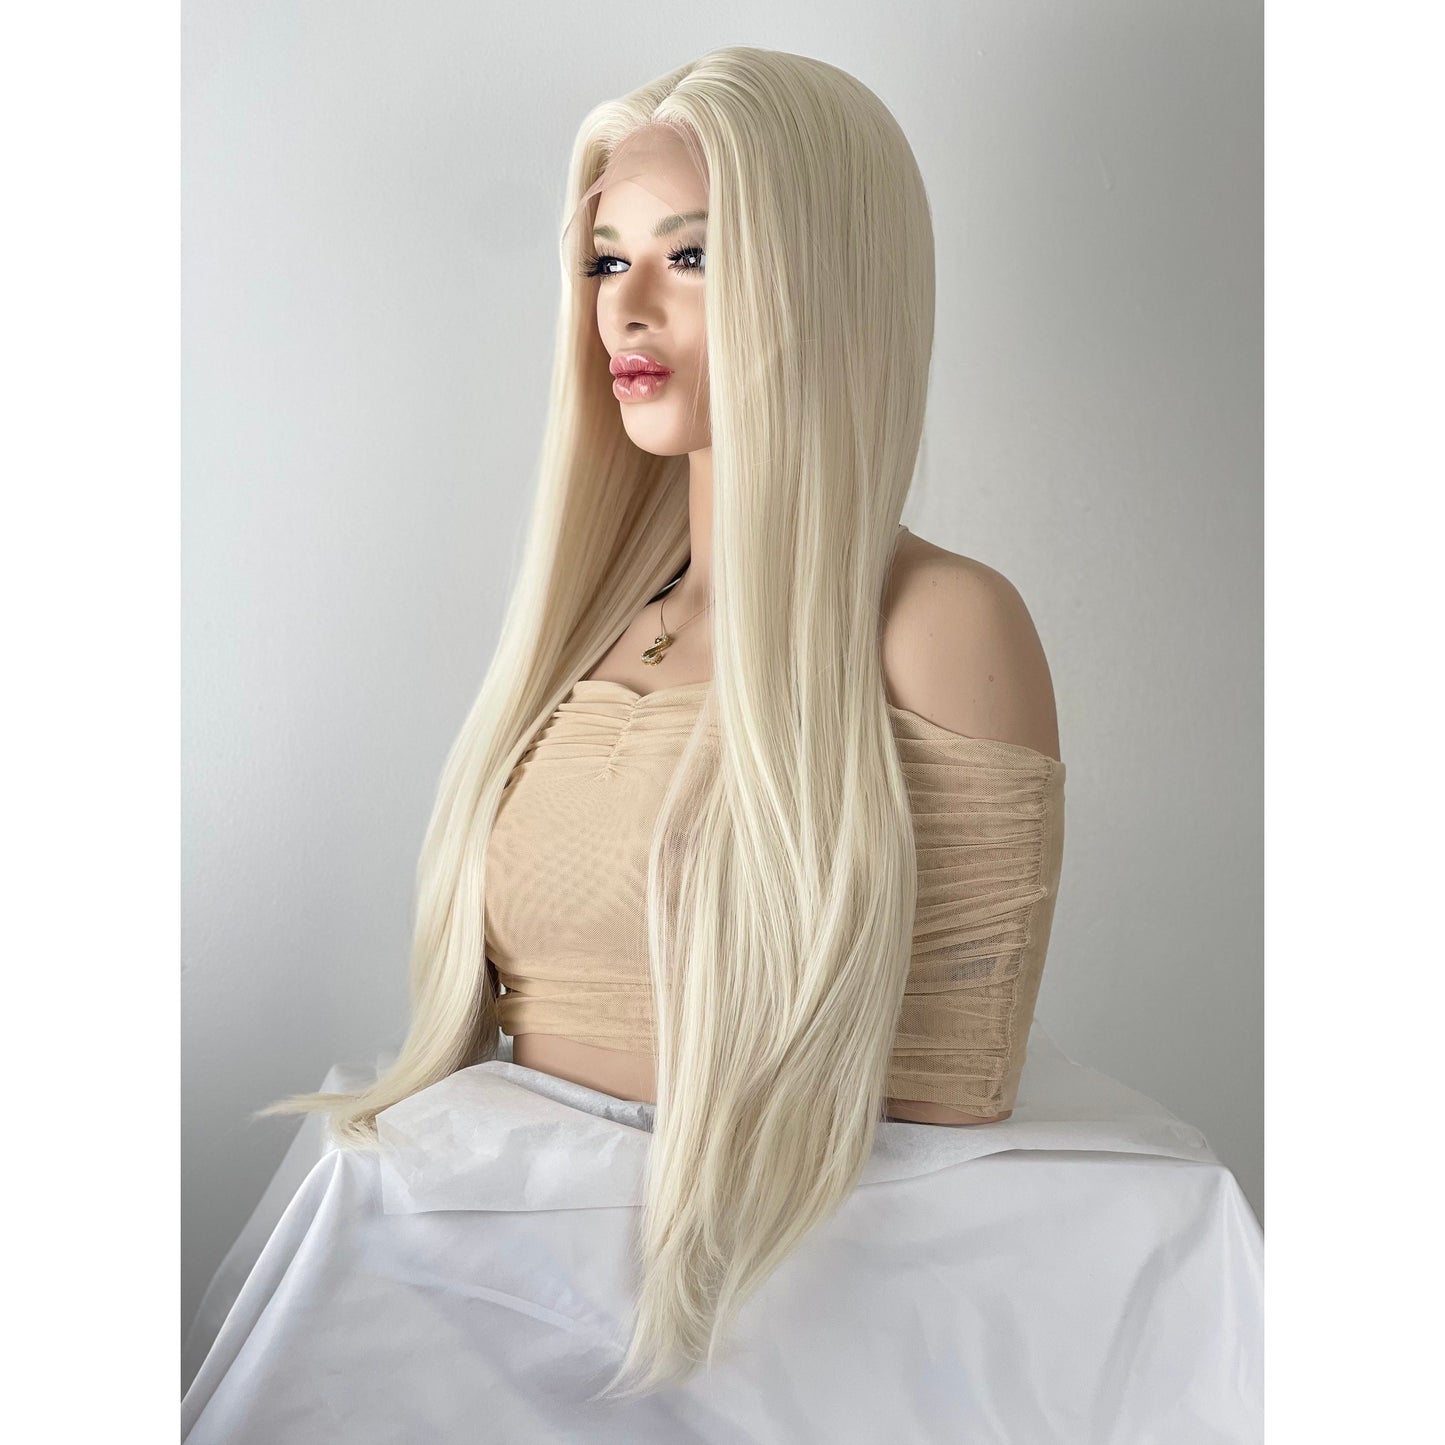 Long Platinum White Blonde Long Straight Wig, 13x3 Preplucked Free Part Wig, Swiss Lace Front, Heat Resistant Human Hair Blend Wig